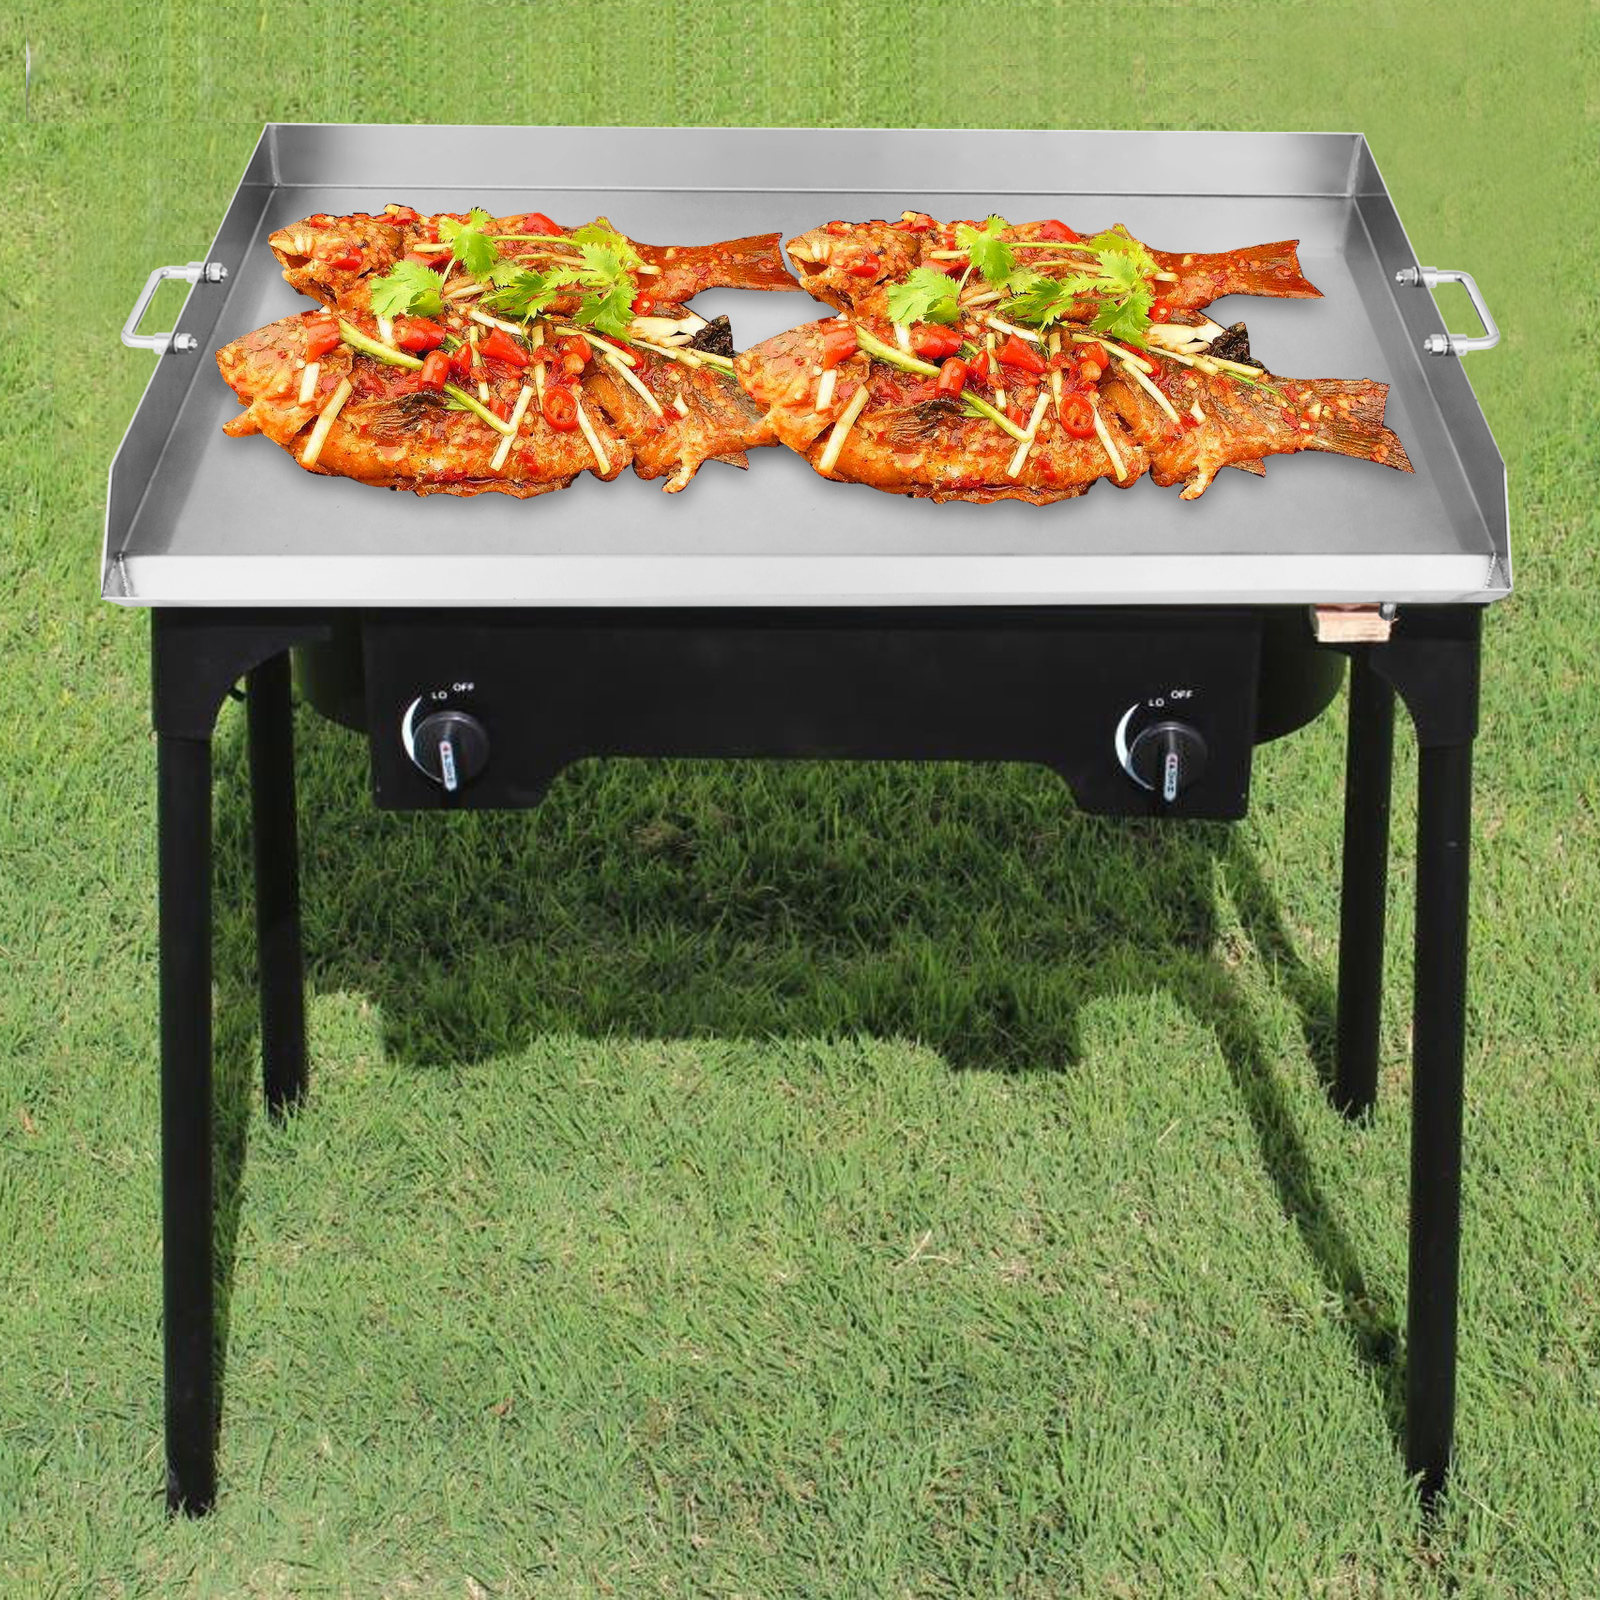 stainless steel flat top grill